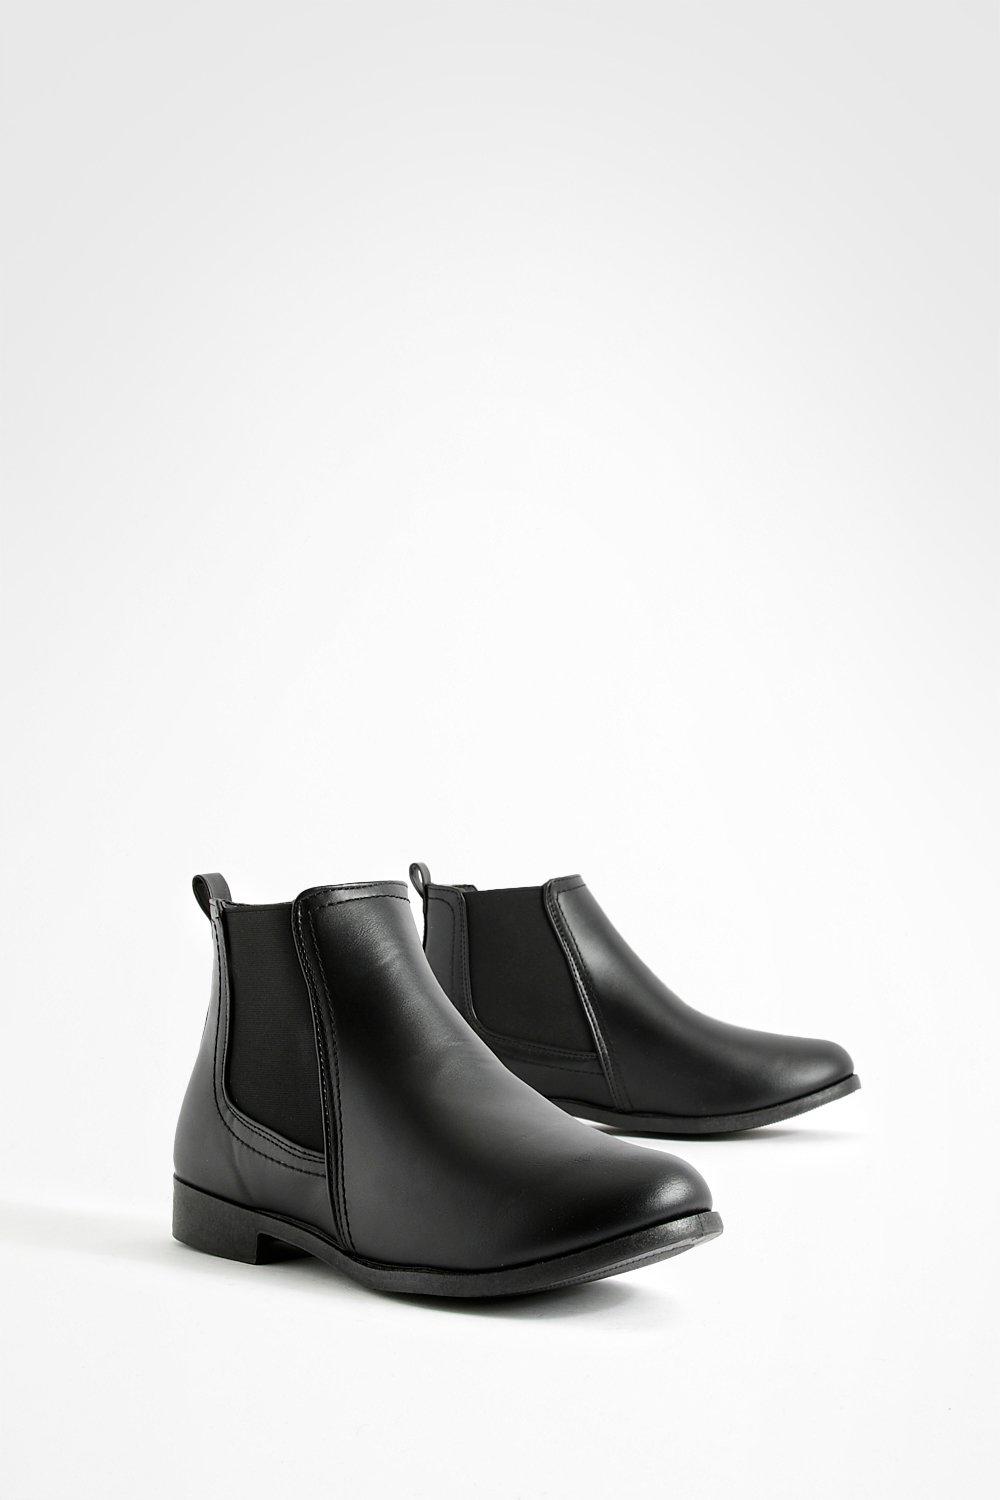 chelsea boots canada